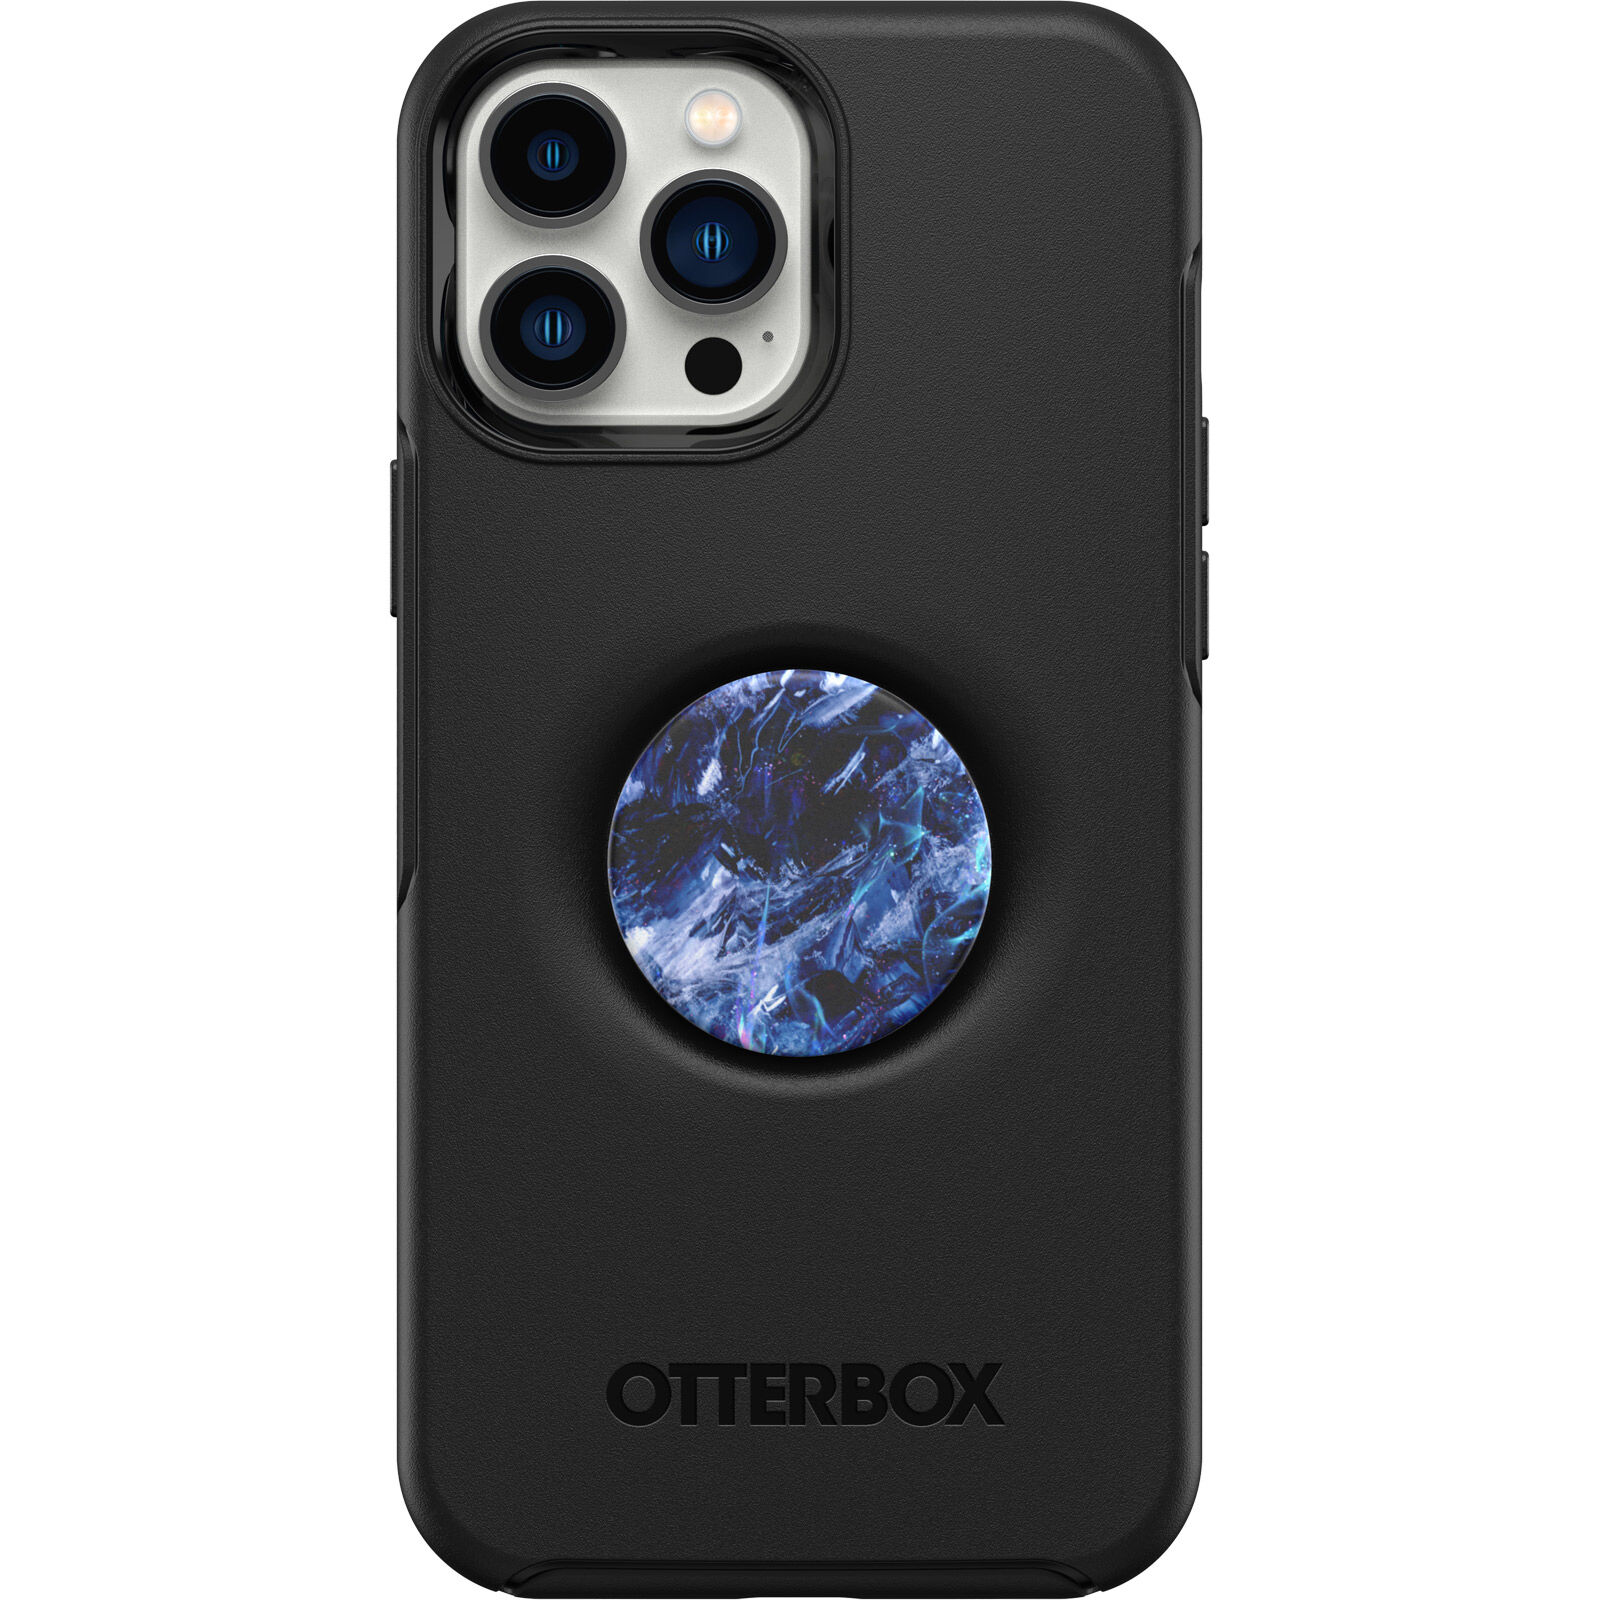 iPhone 13 Pro Max cases from OtterBox